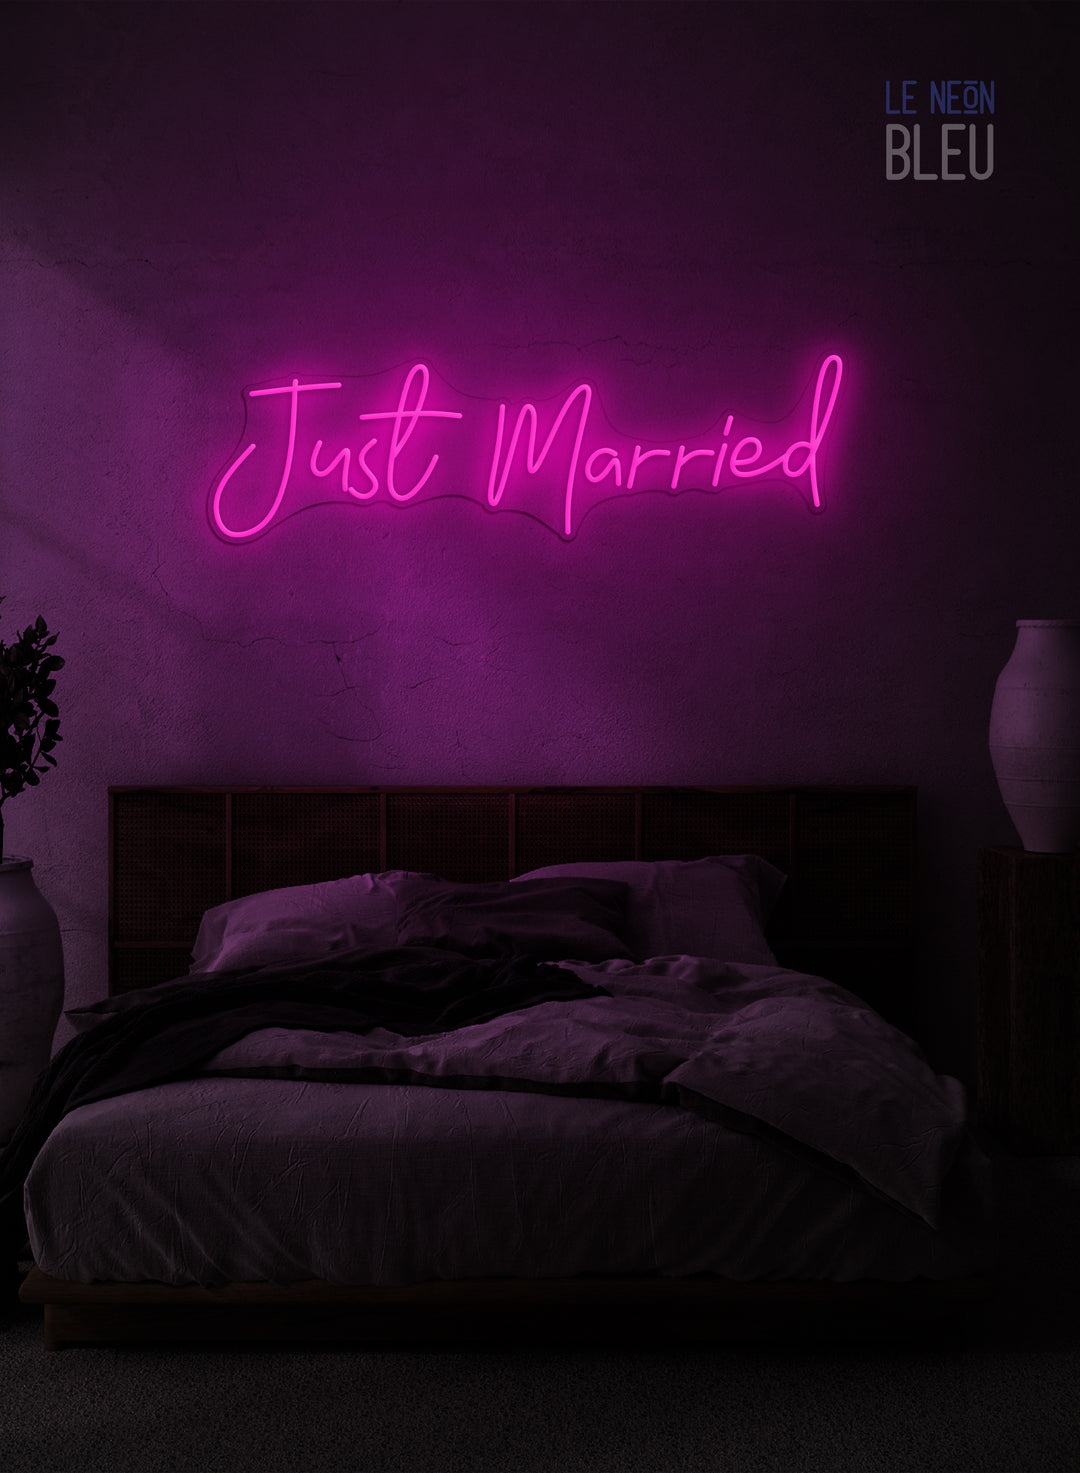 Just Married - Néon LED